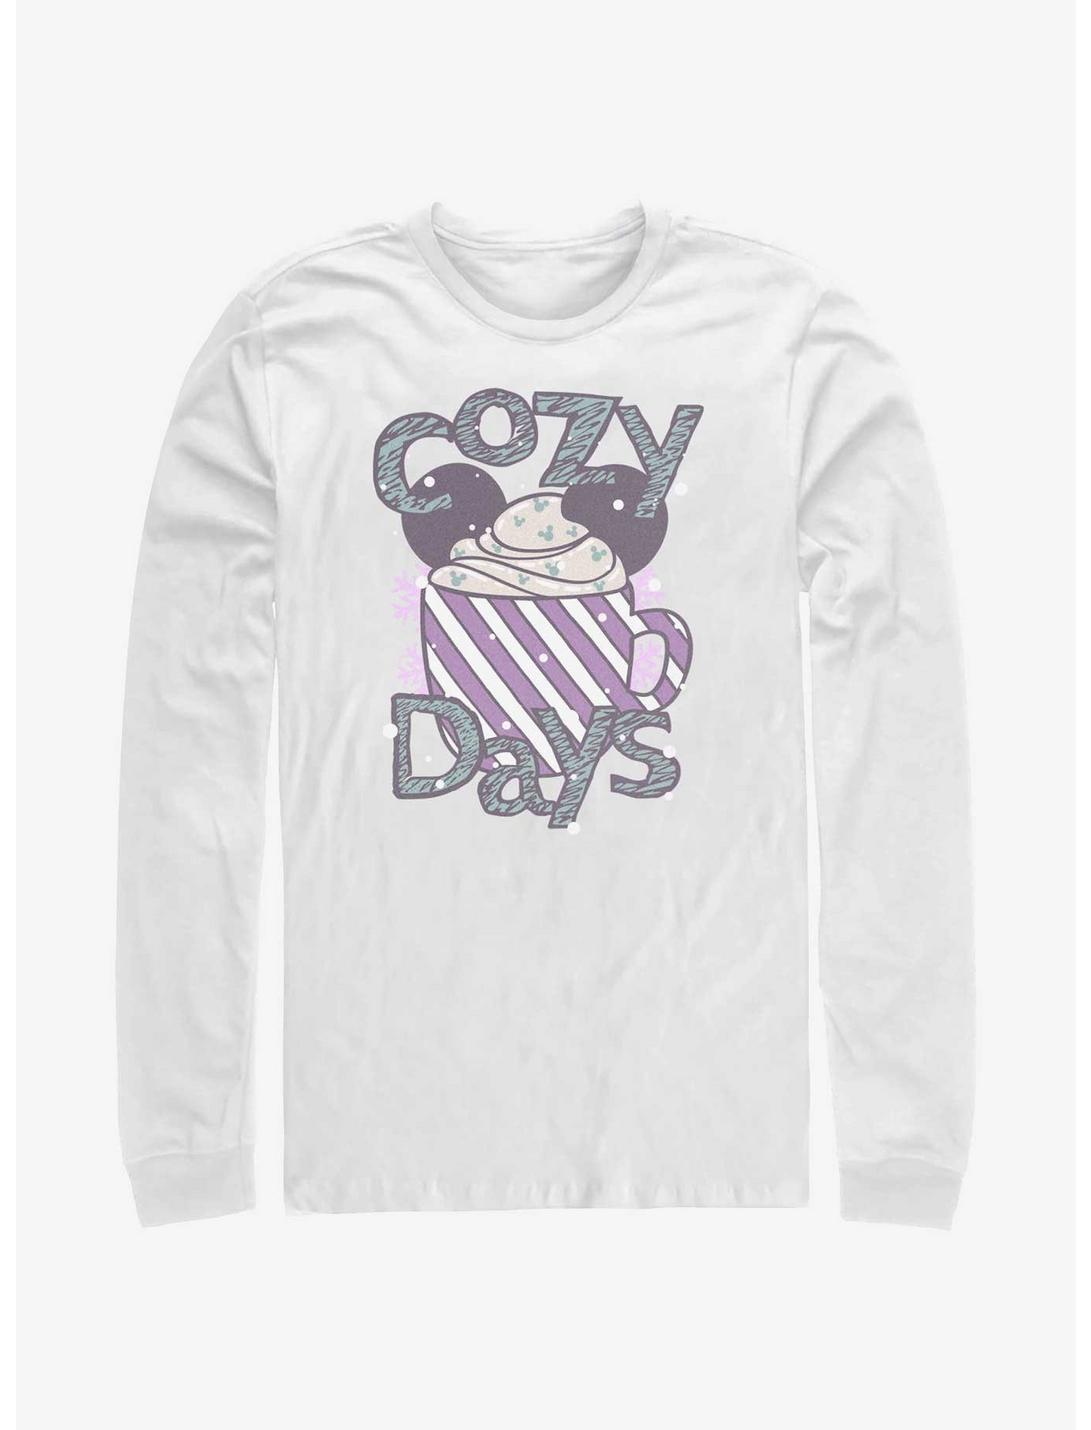 Disney Mickey Mouse Cozy Days Hot Cocoa Long-Sleeve T-Shirt, WHITE, hi-res